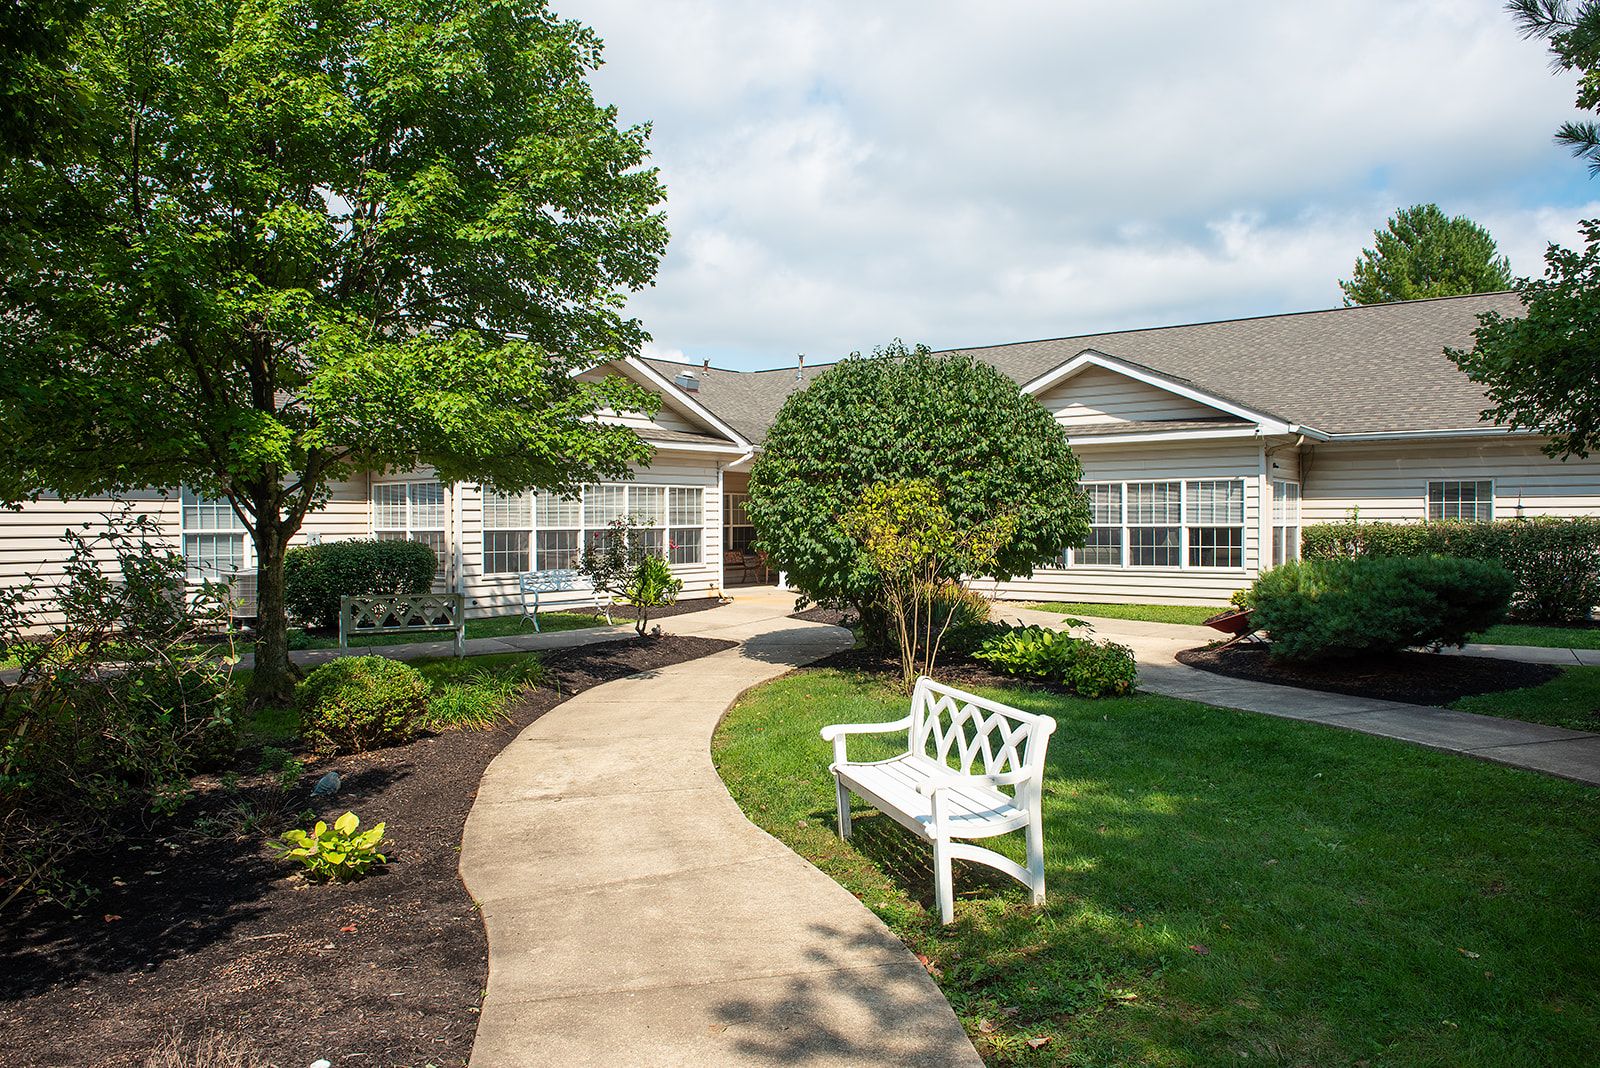 Commonwealth Senior Living at Hagerstown 2